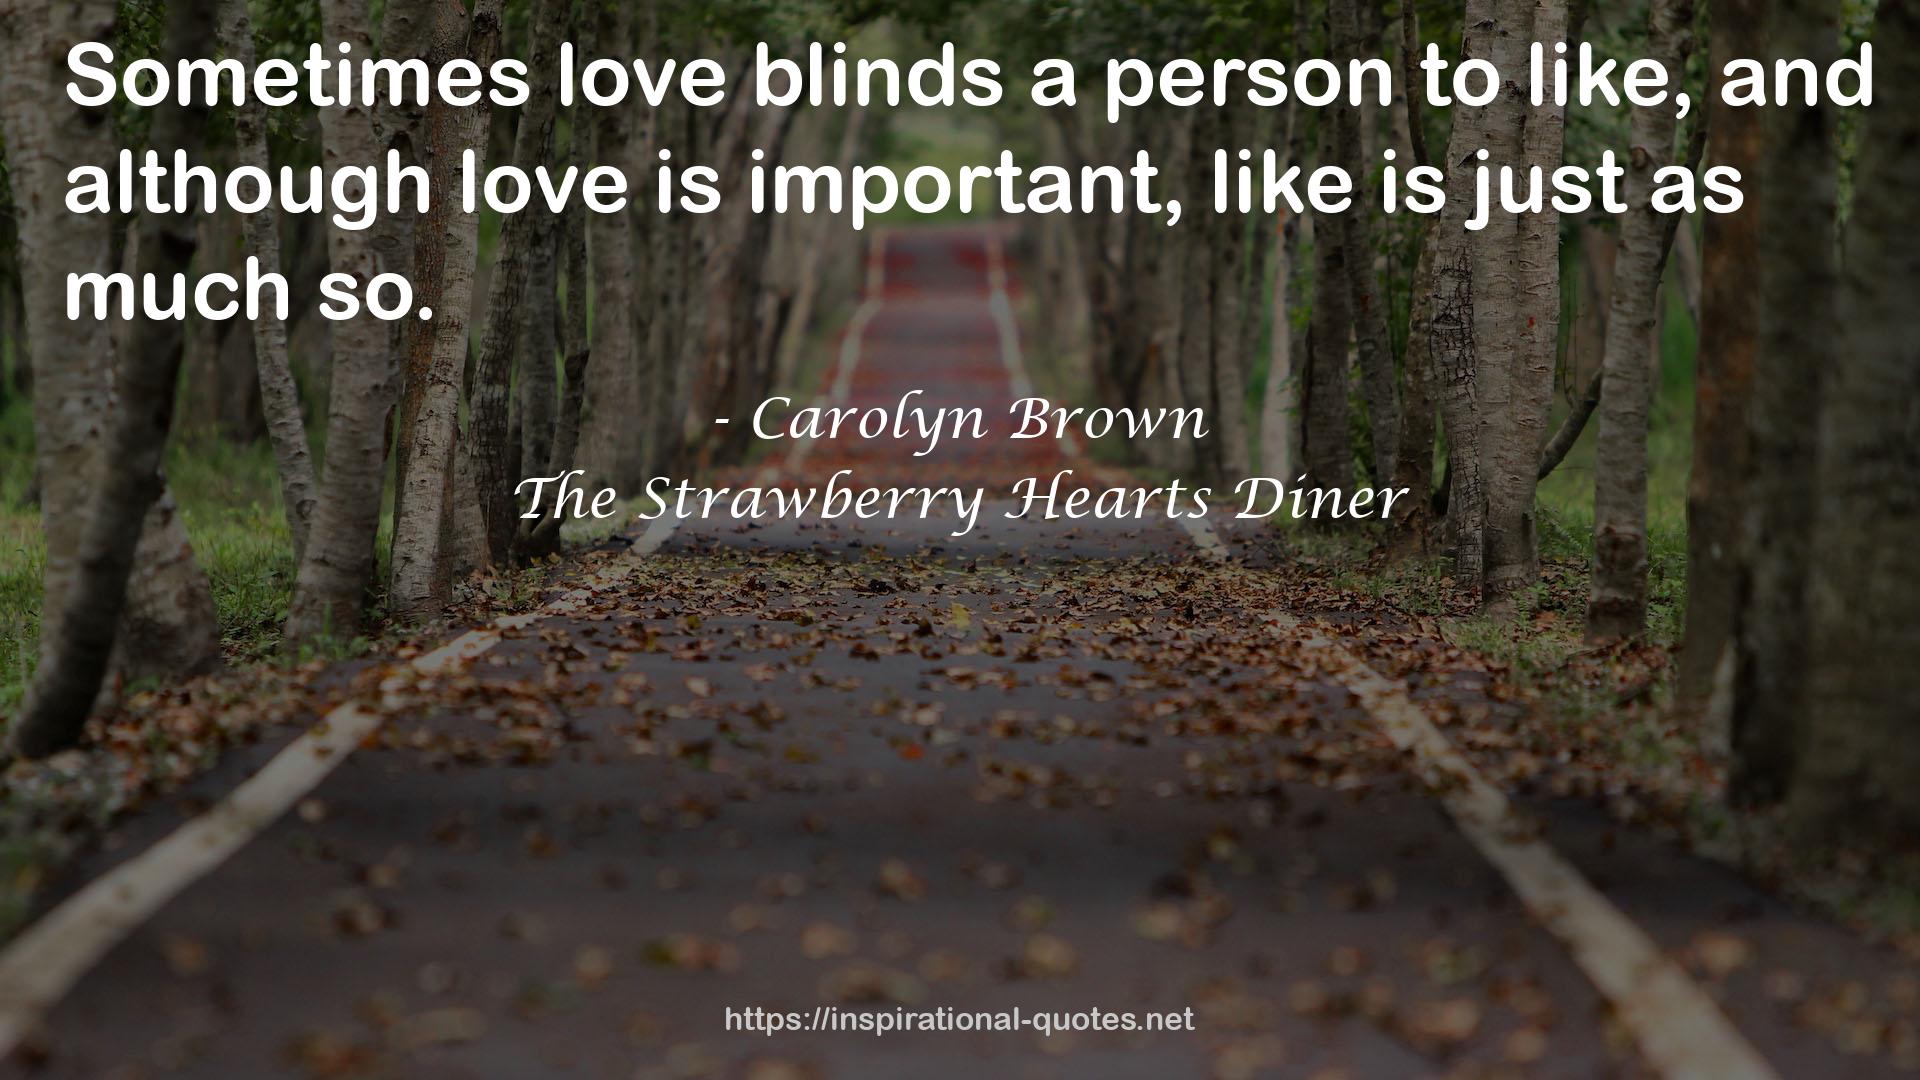 The Strawberry Hearts Diner QUOTES